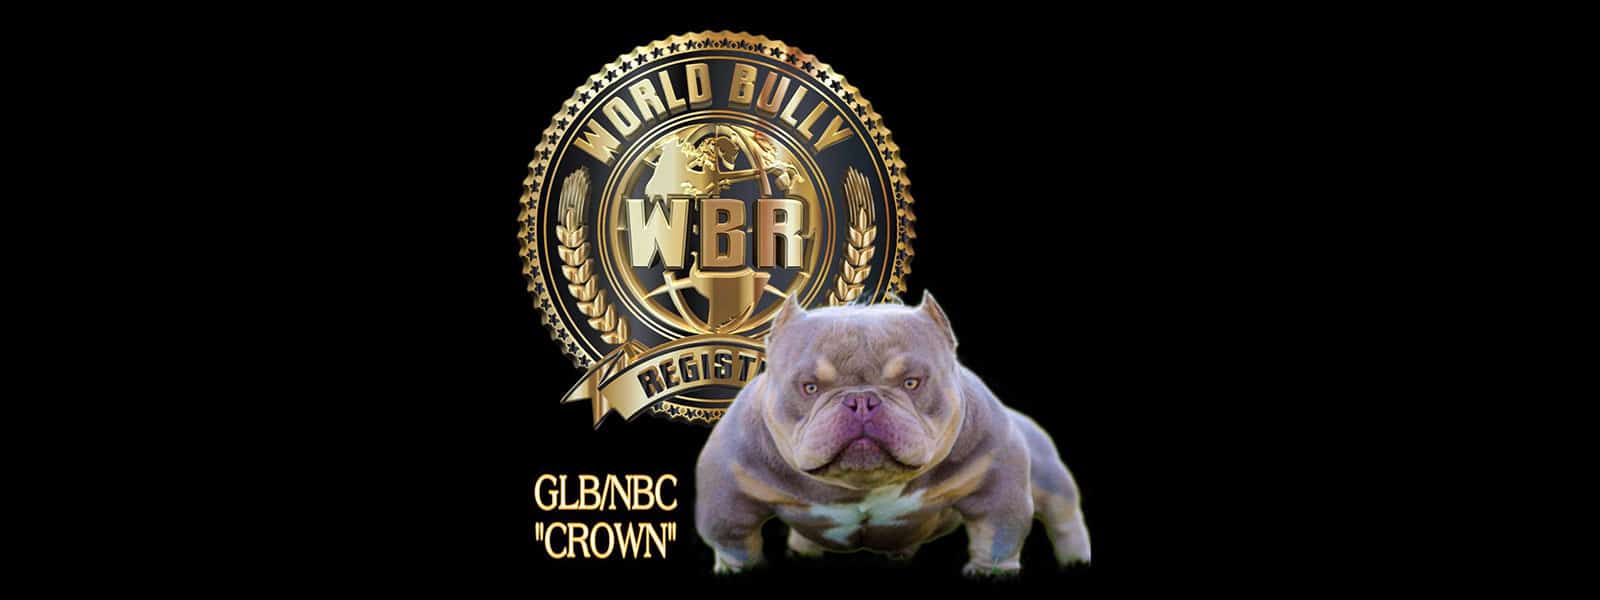 The Main Event Bully Expo by World Bully Registry